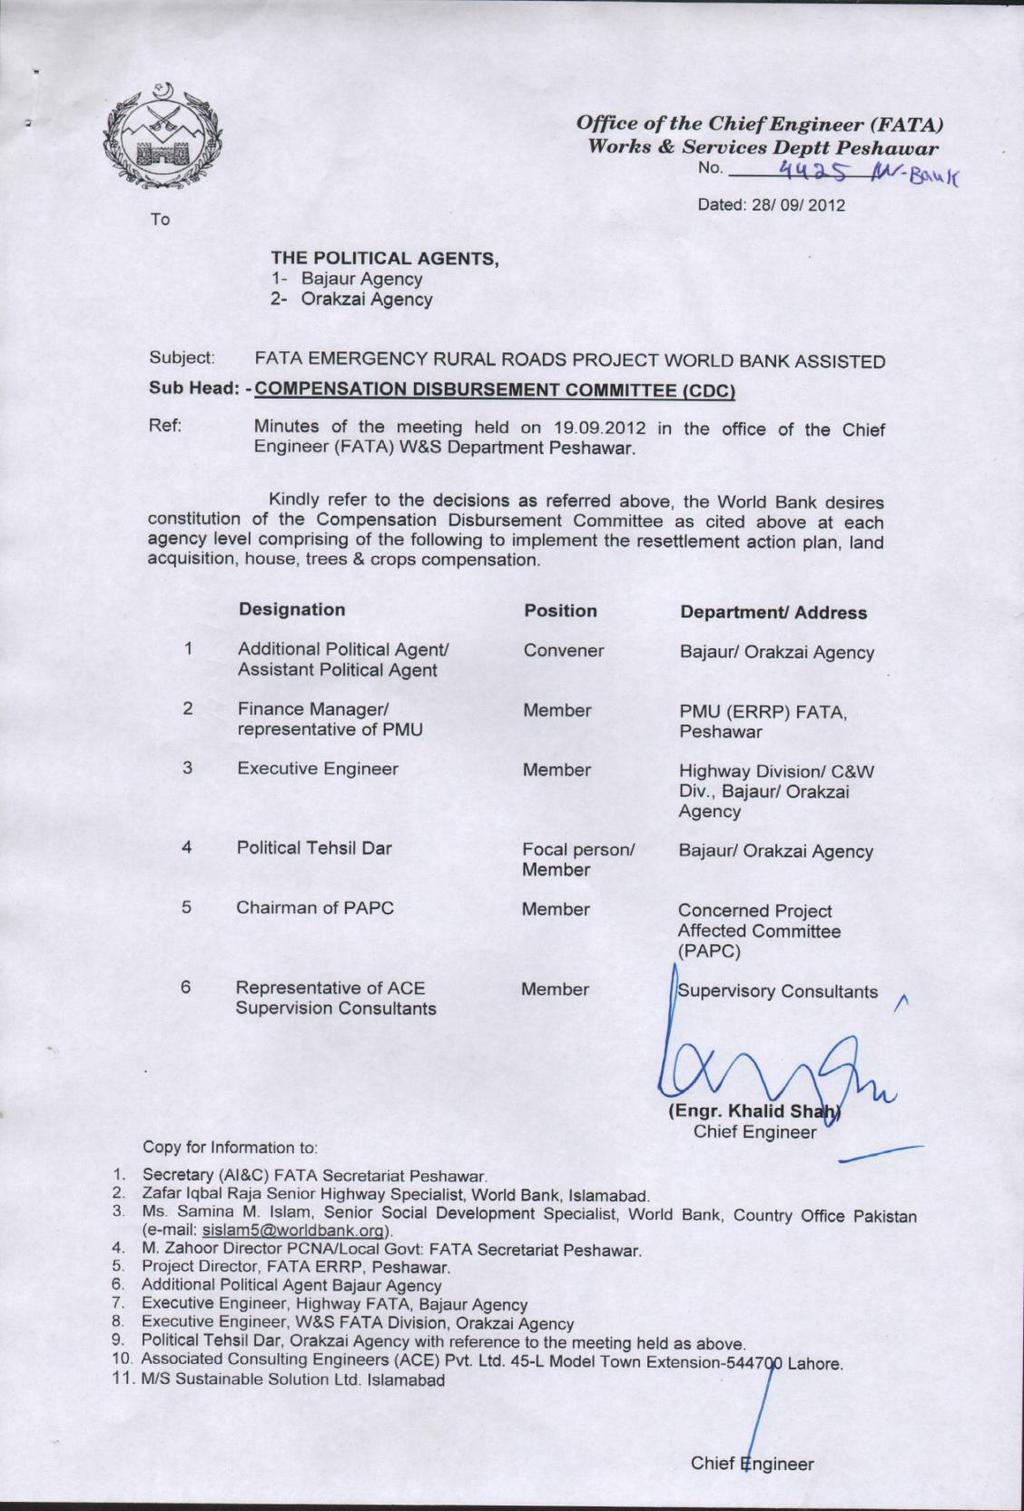 Annexure VI- Notification for